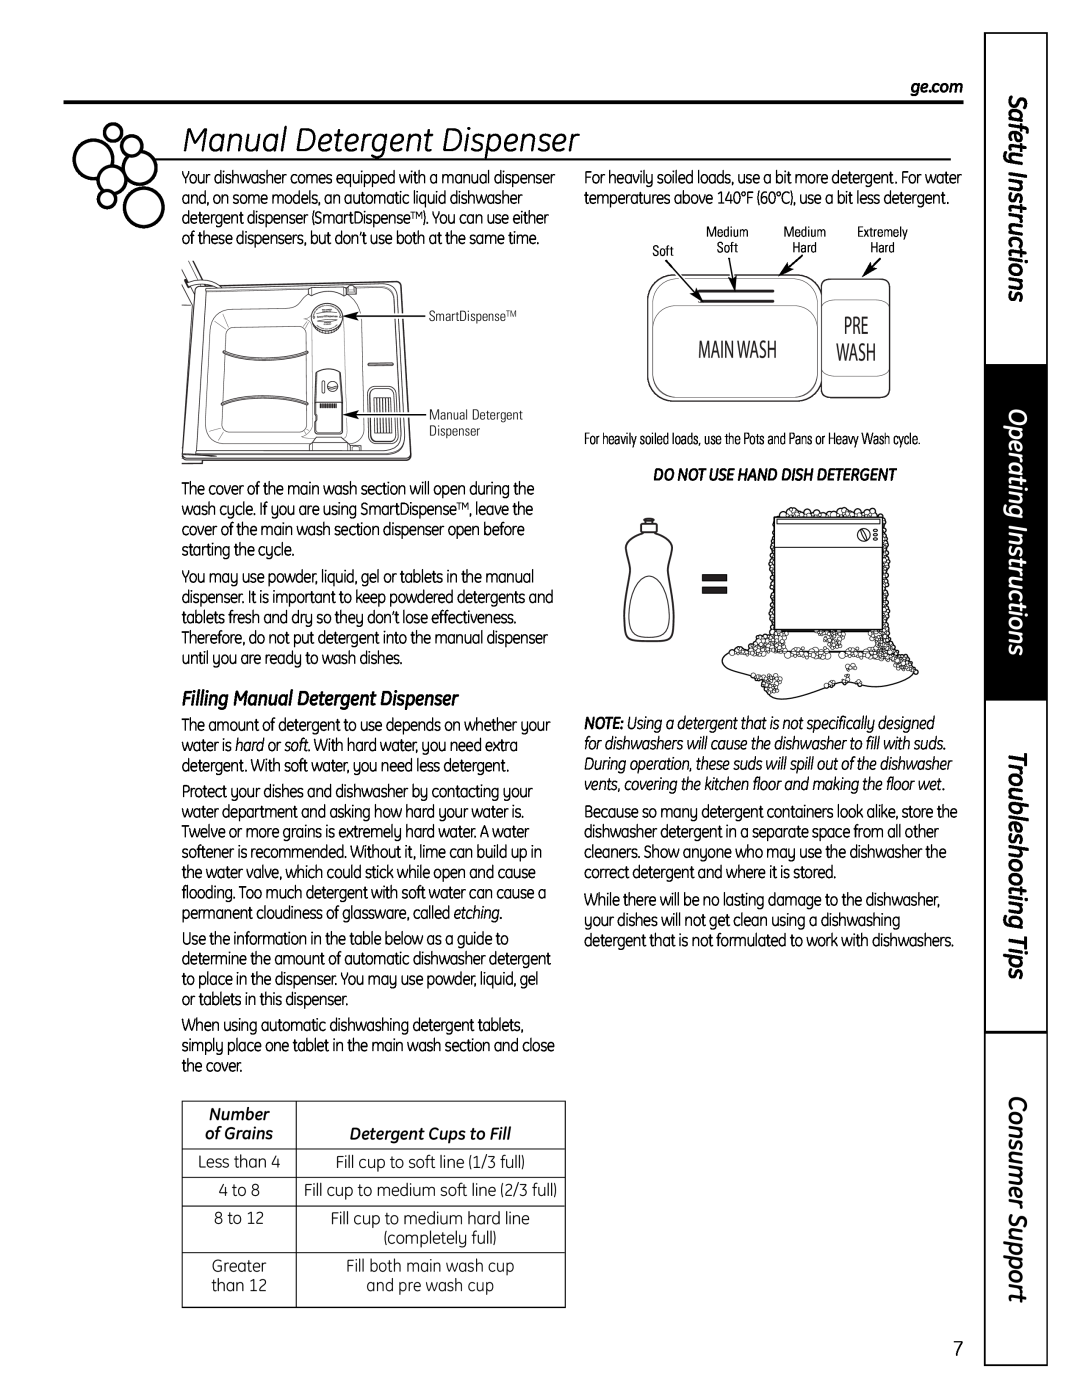 GE 165D4700P382 Instructions, Safety, Filling Manual Detergent Dispenser, Troubleshooting Tips Consumer Support 